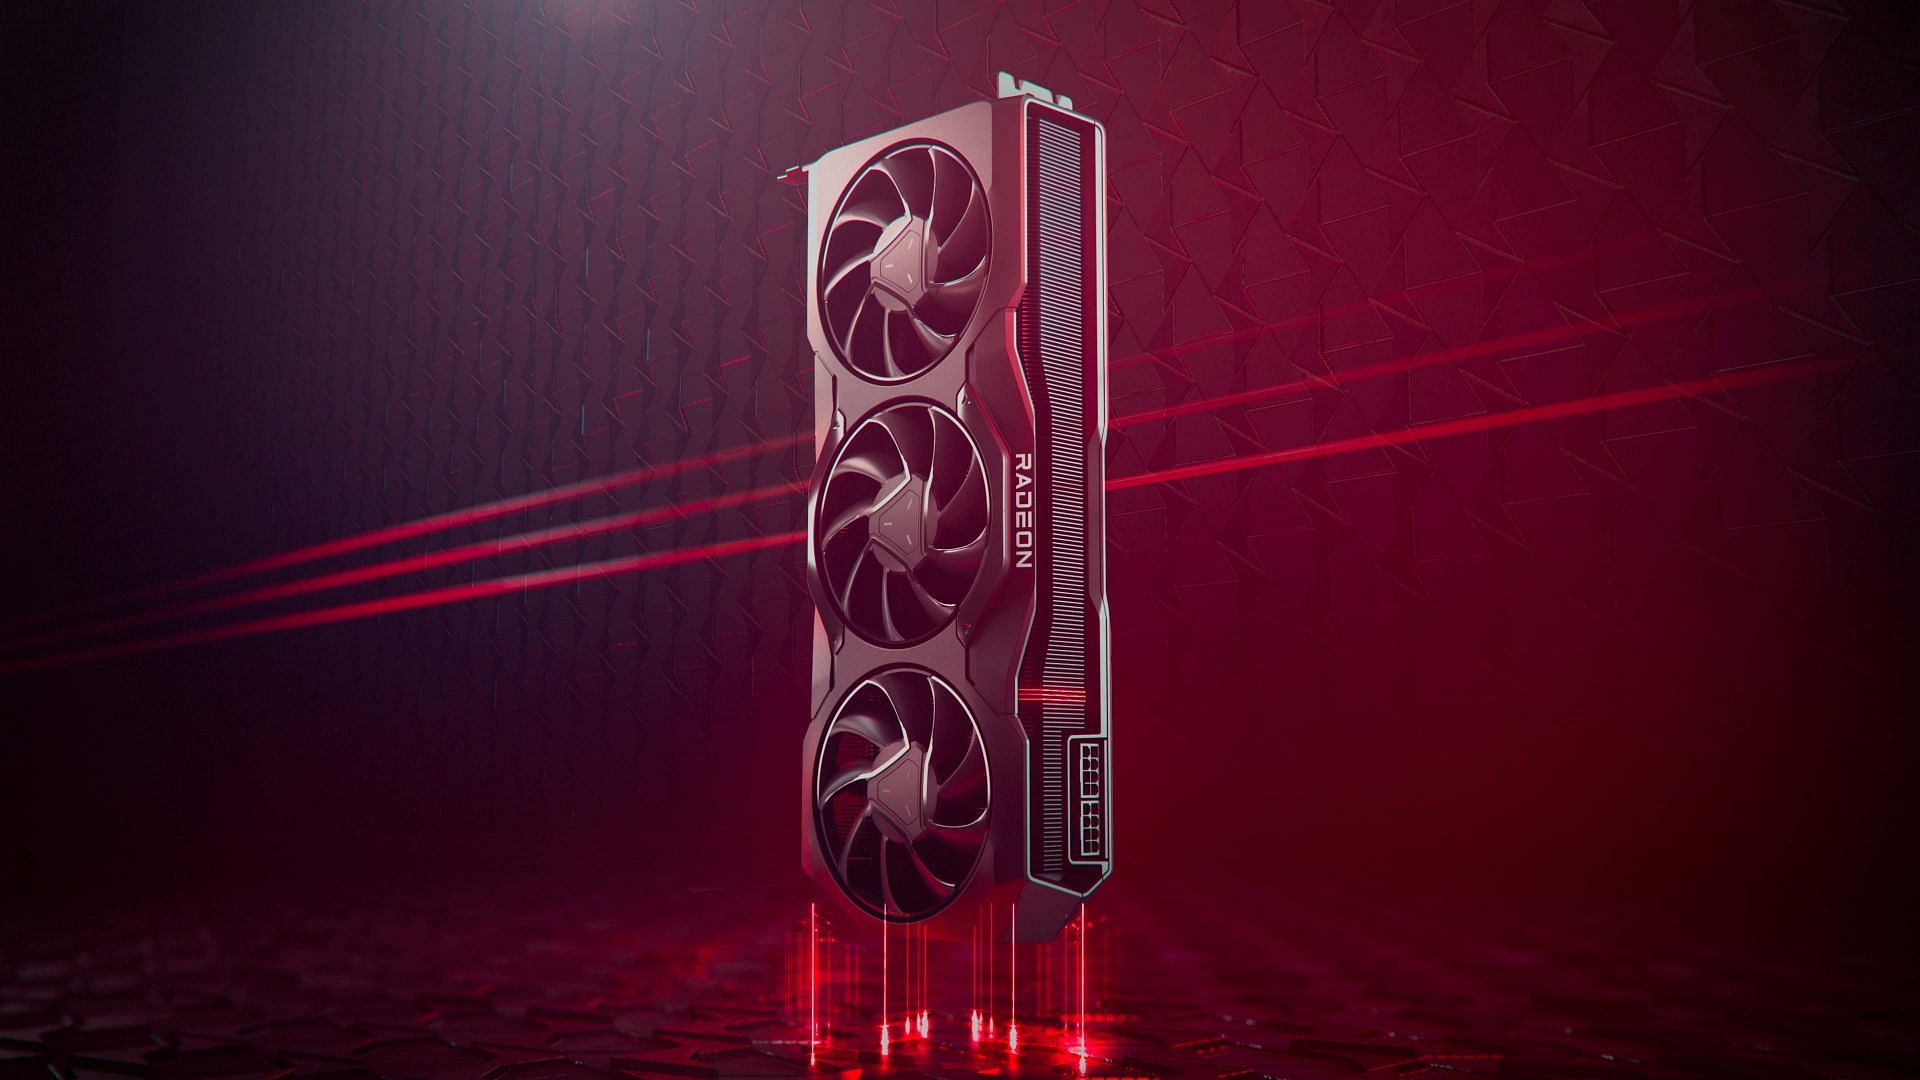 AMD Promises to fix the overheating problems with their 7900 XTX graphics cards (Image via AMD)